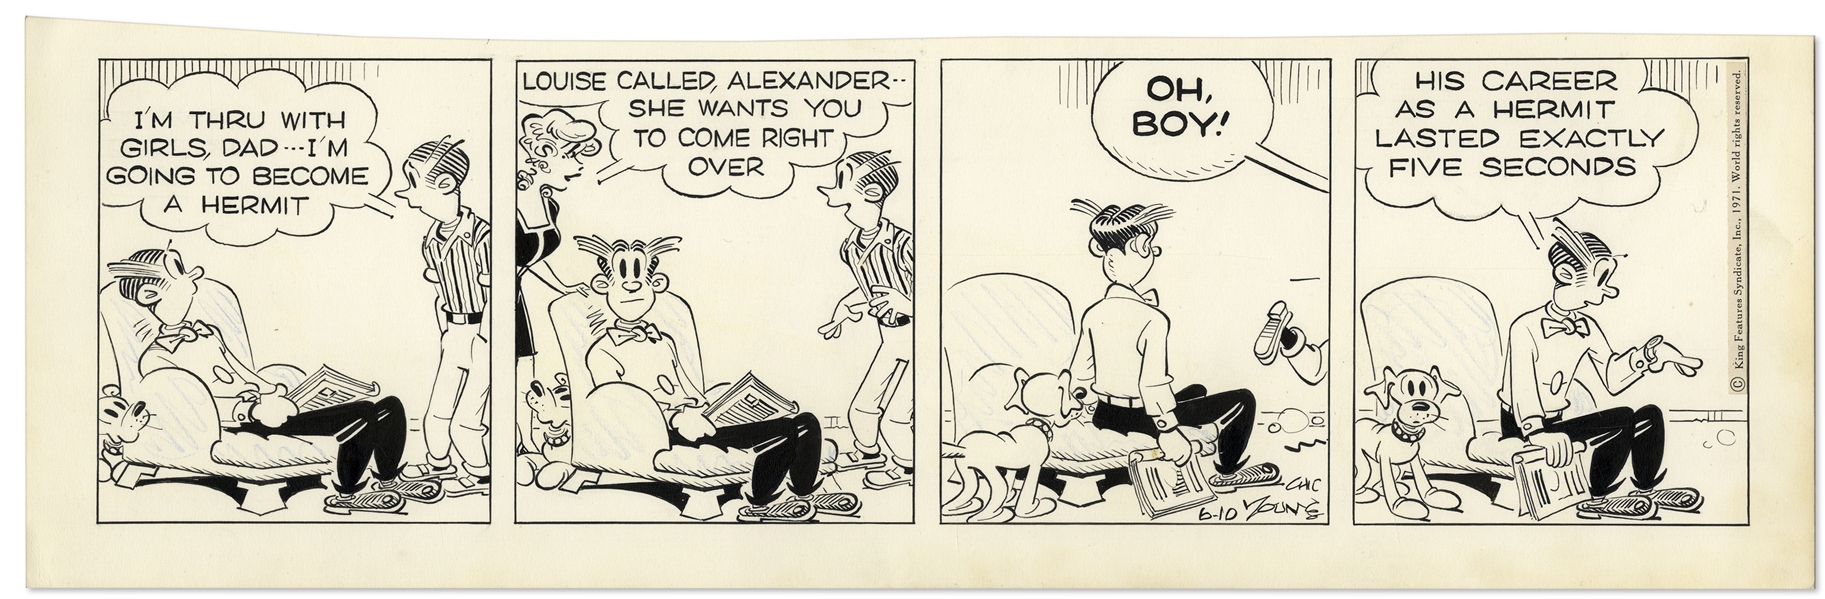 2 Chic Young Hand-Drawn ''Blondie'' Comic Strips From 1971 -- With Chic Young's Original Artwork for Both